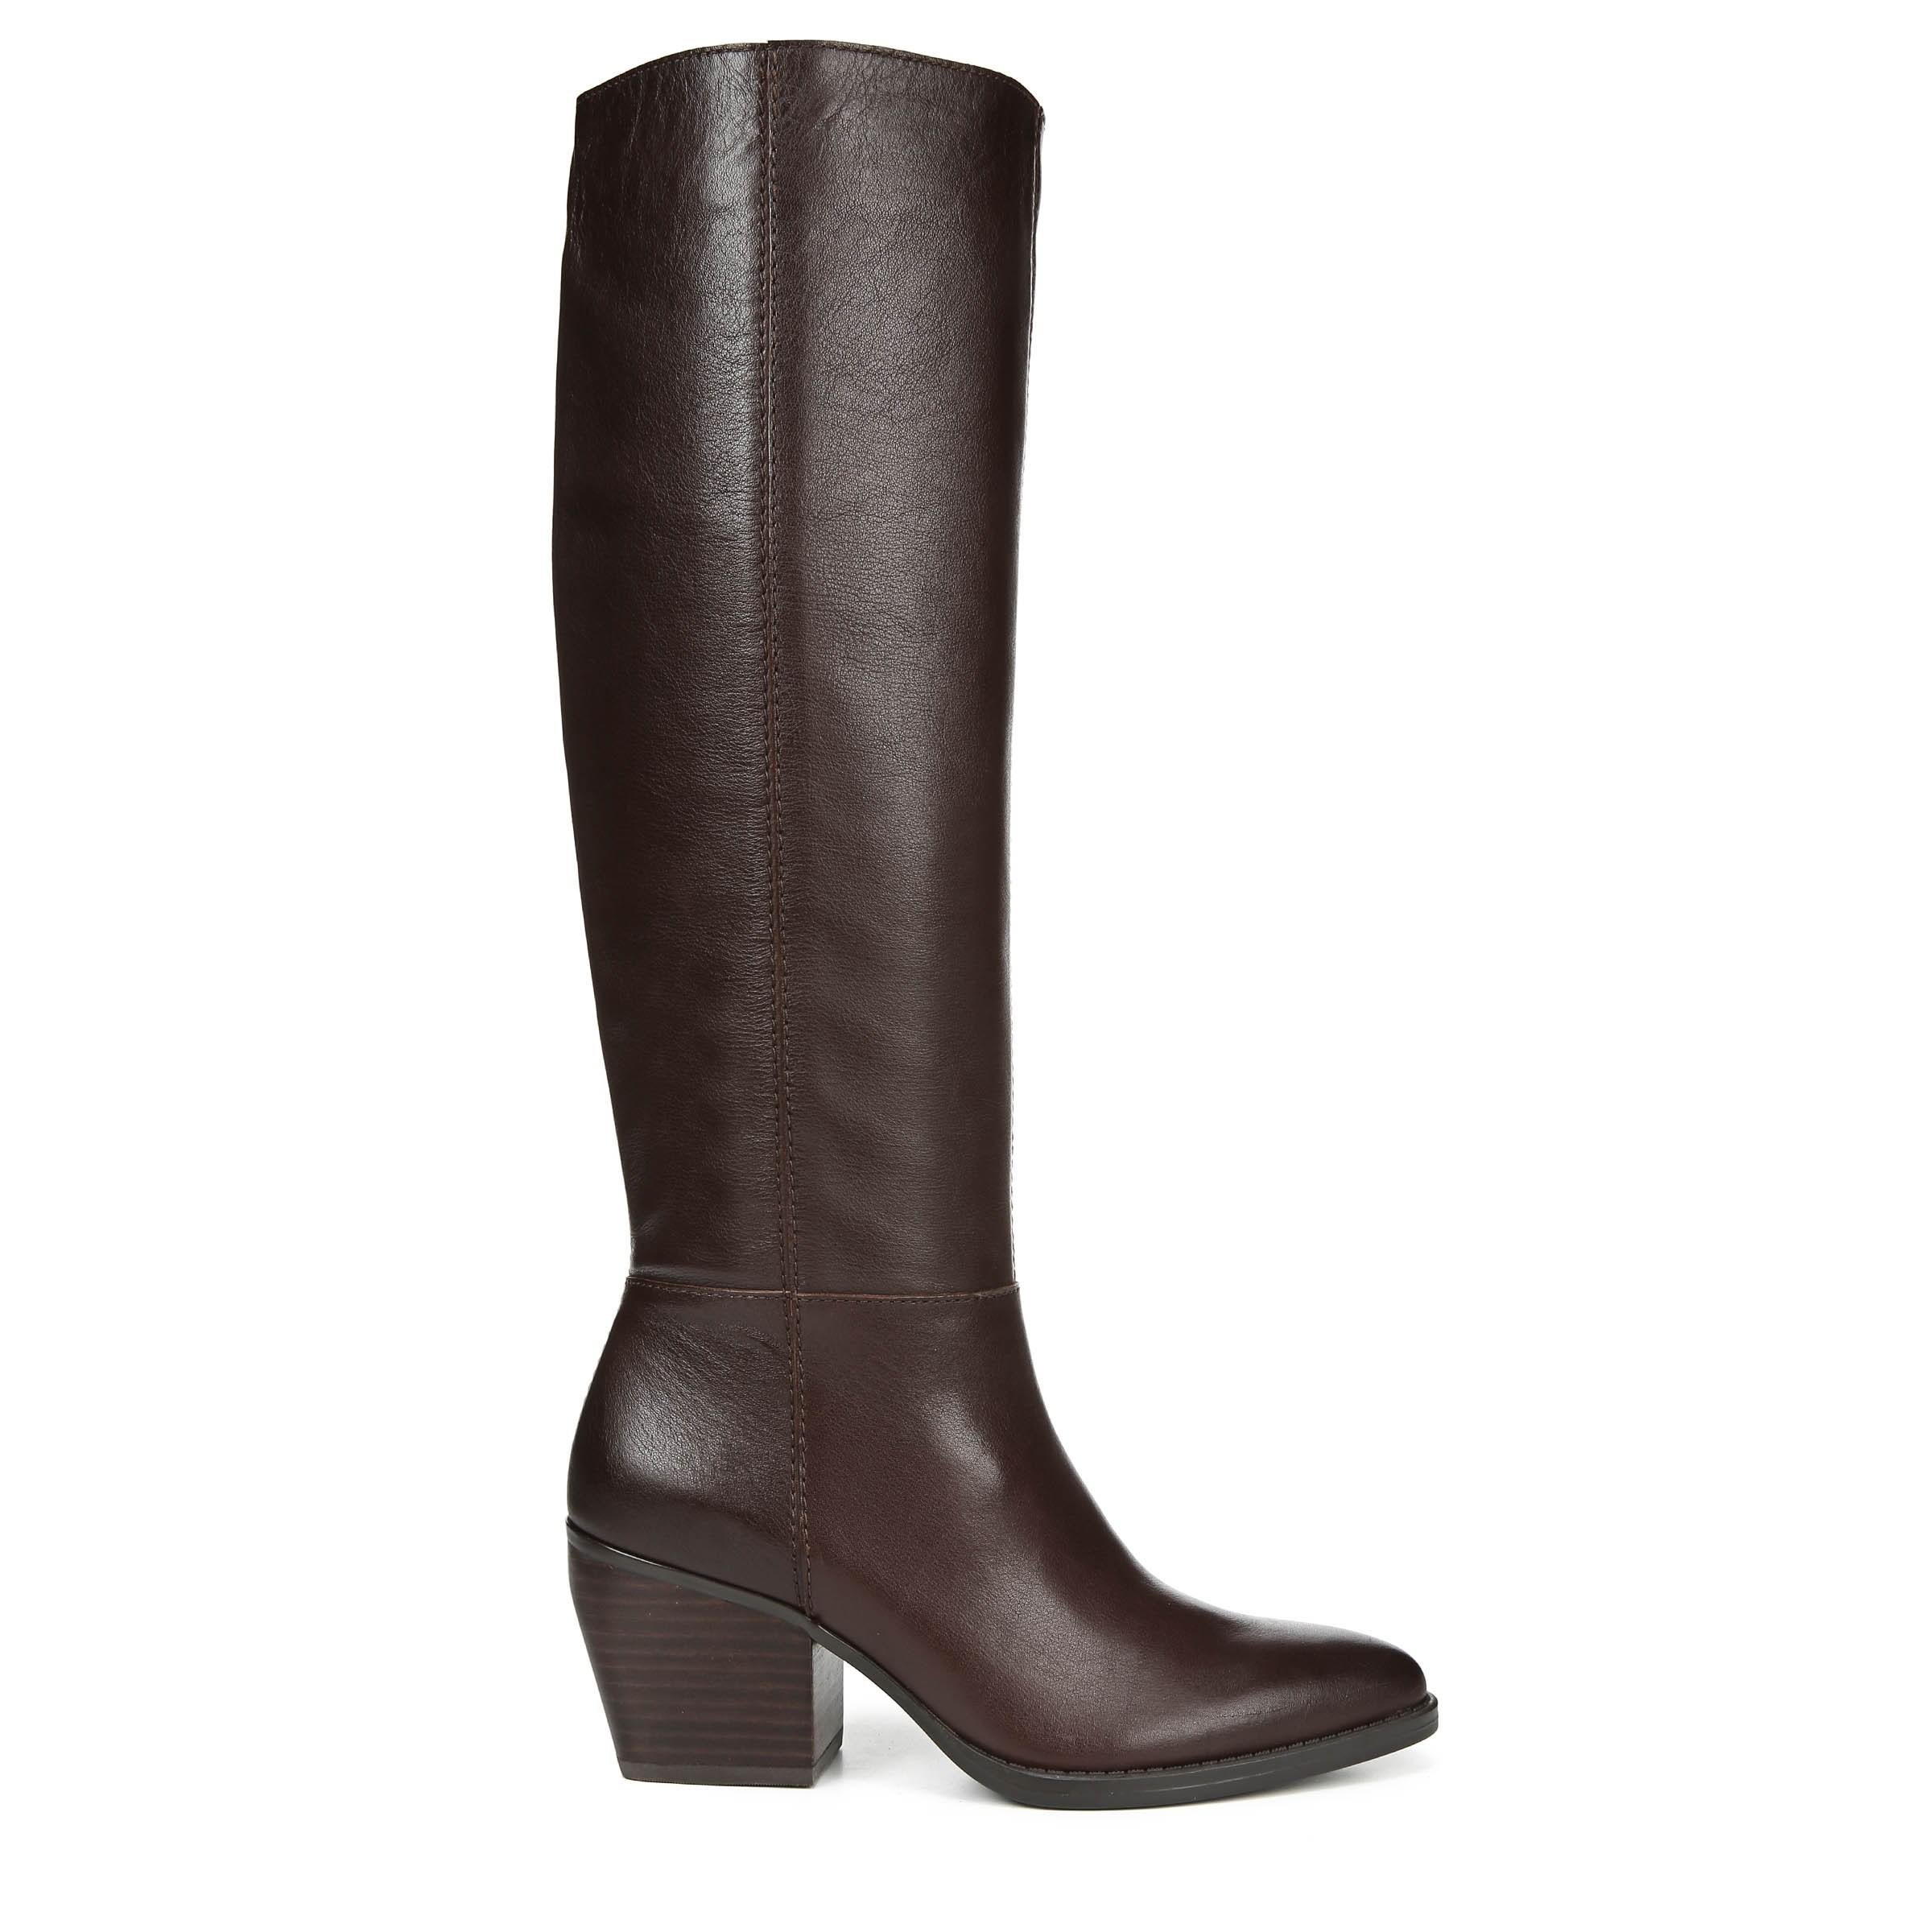 Naturalizer Fae Tall Boot in Chocolate Leather (Brown) - Save 1% - Lyst